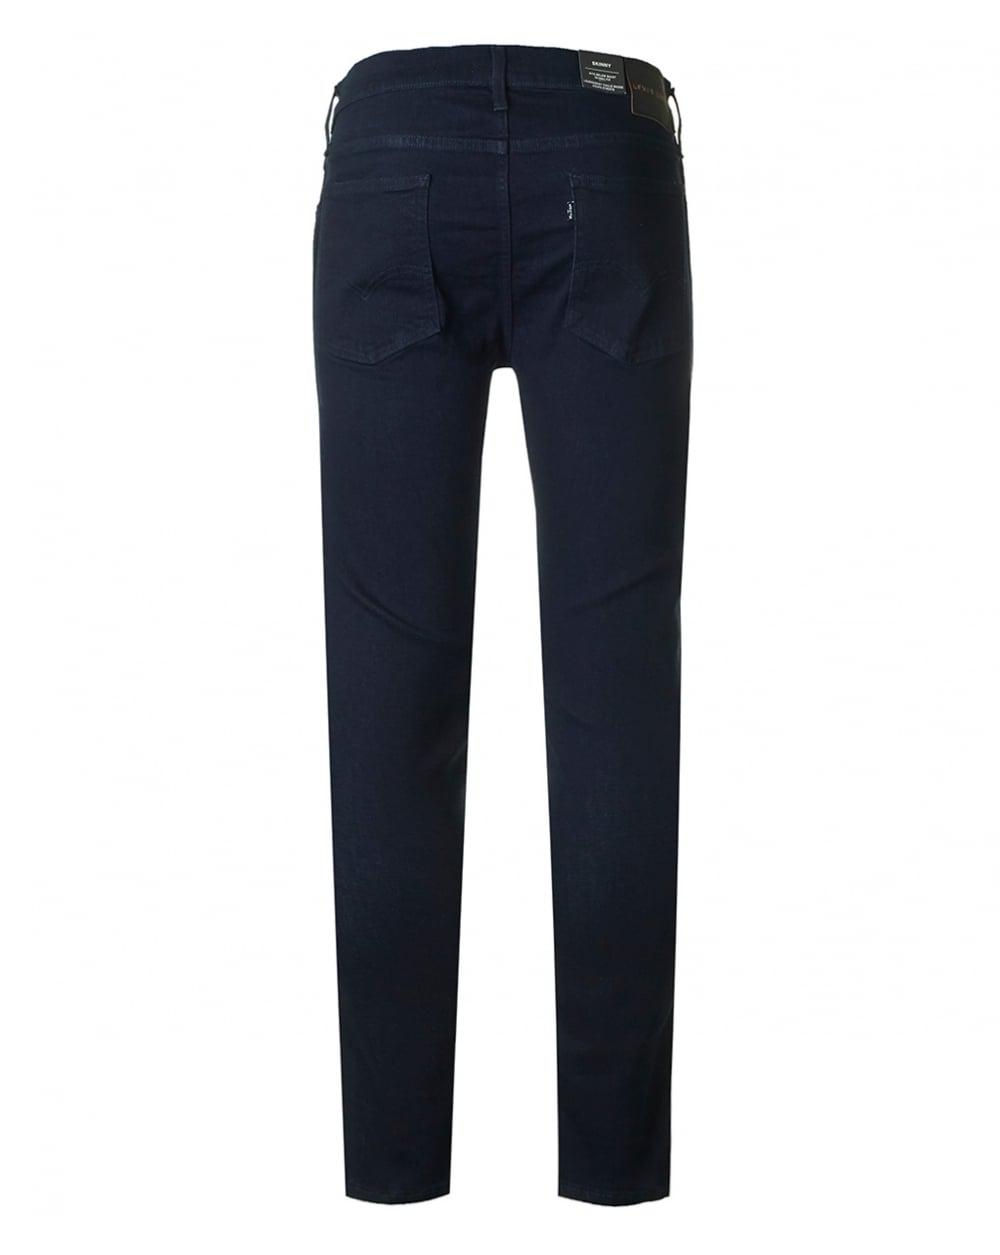 Levi's Line 8 Skinny Fit Jeans in Blue for Men - Lyst